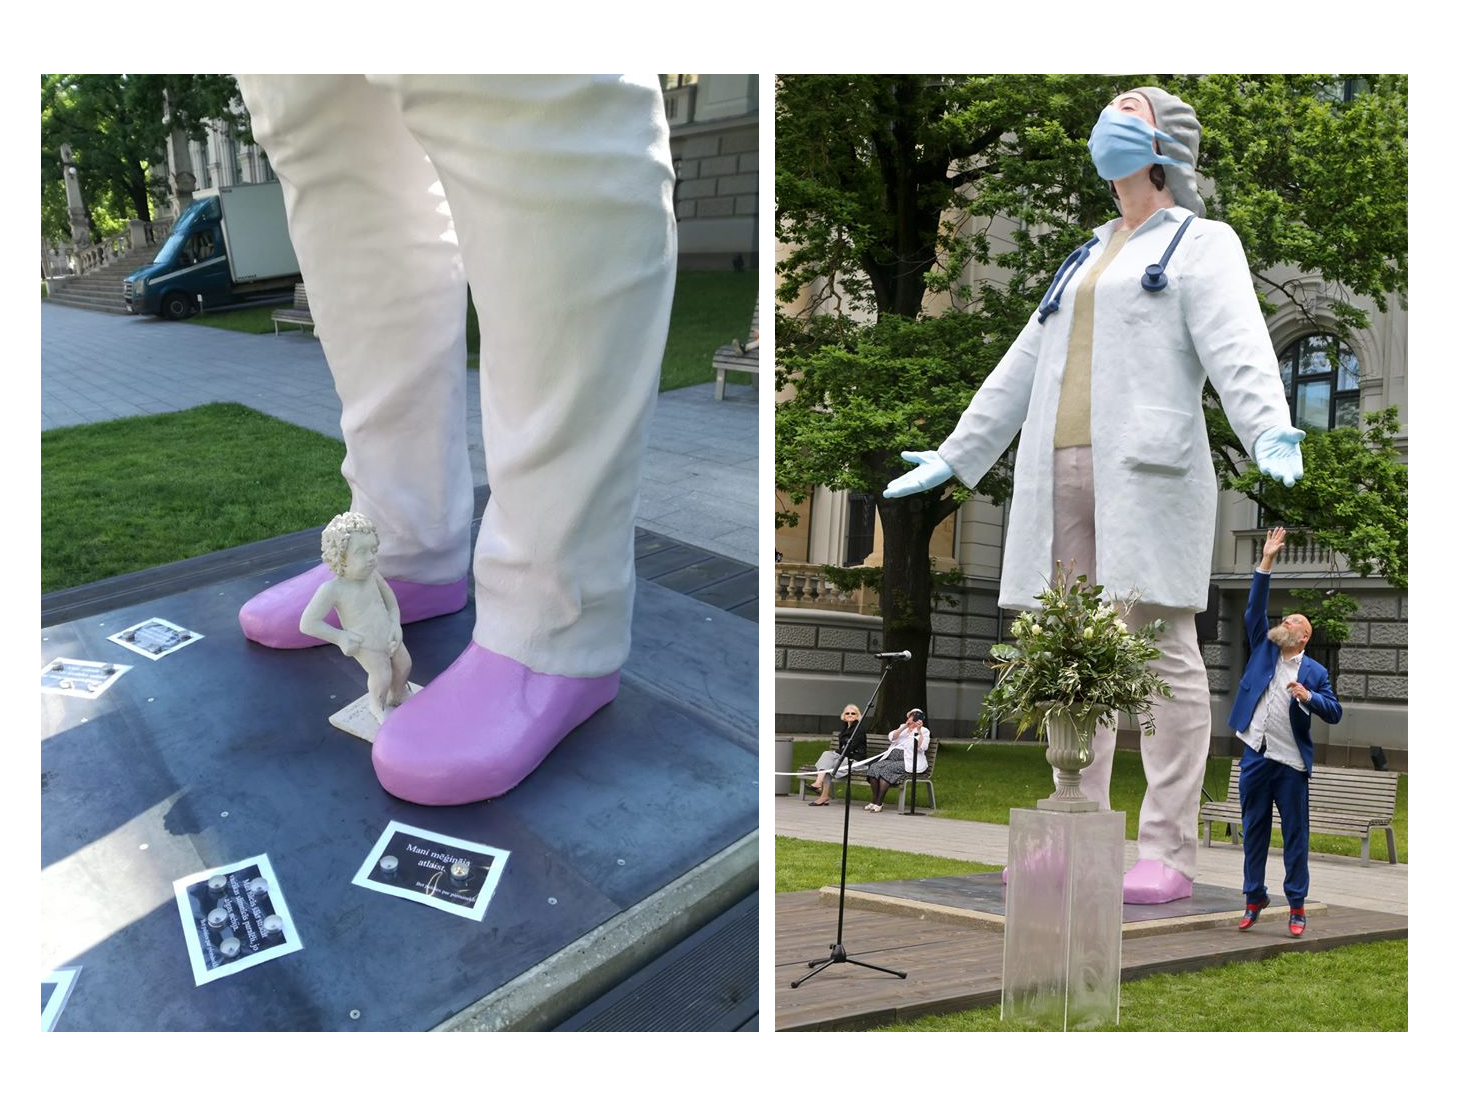 Pic of the day: A plastic foam sculpture was installed in Riga in gratitude to the doctors